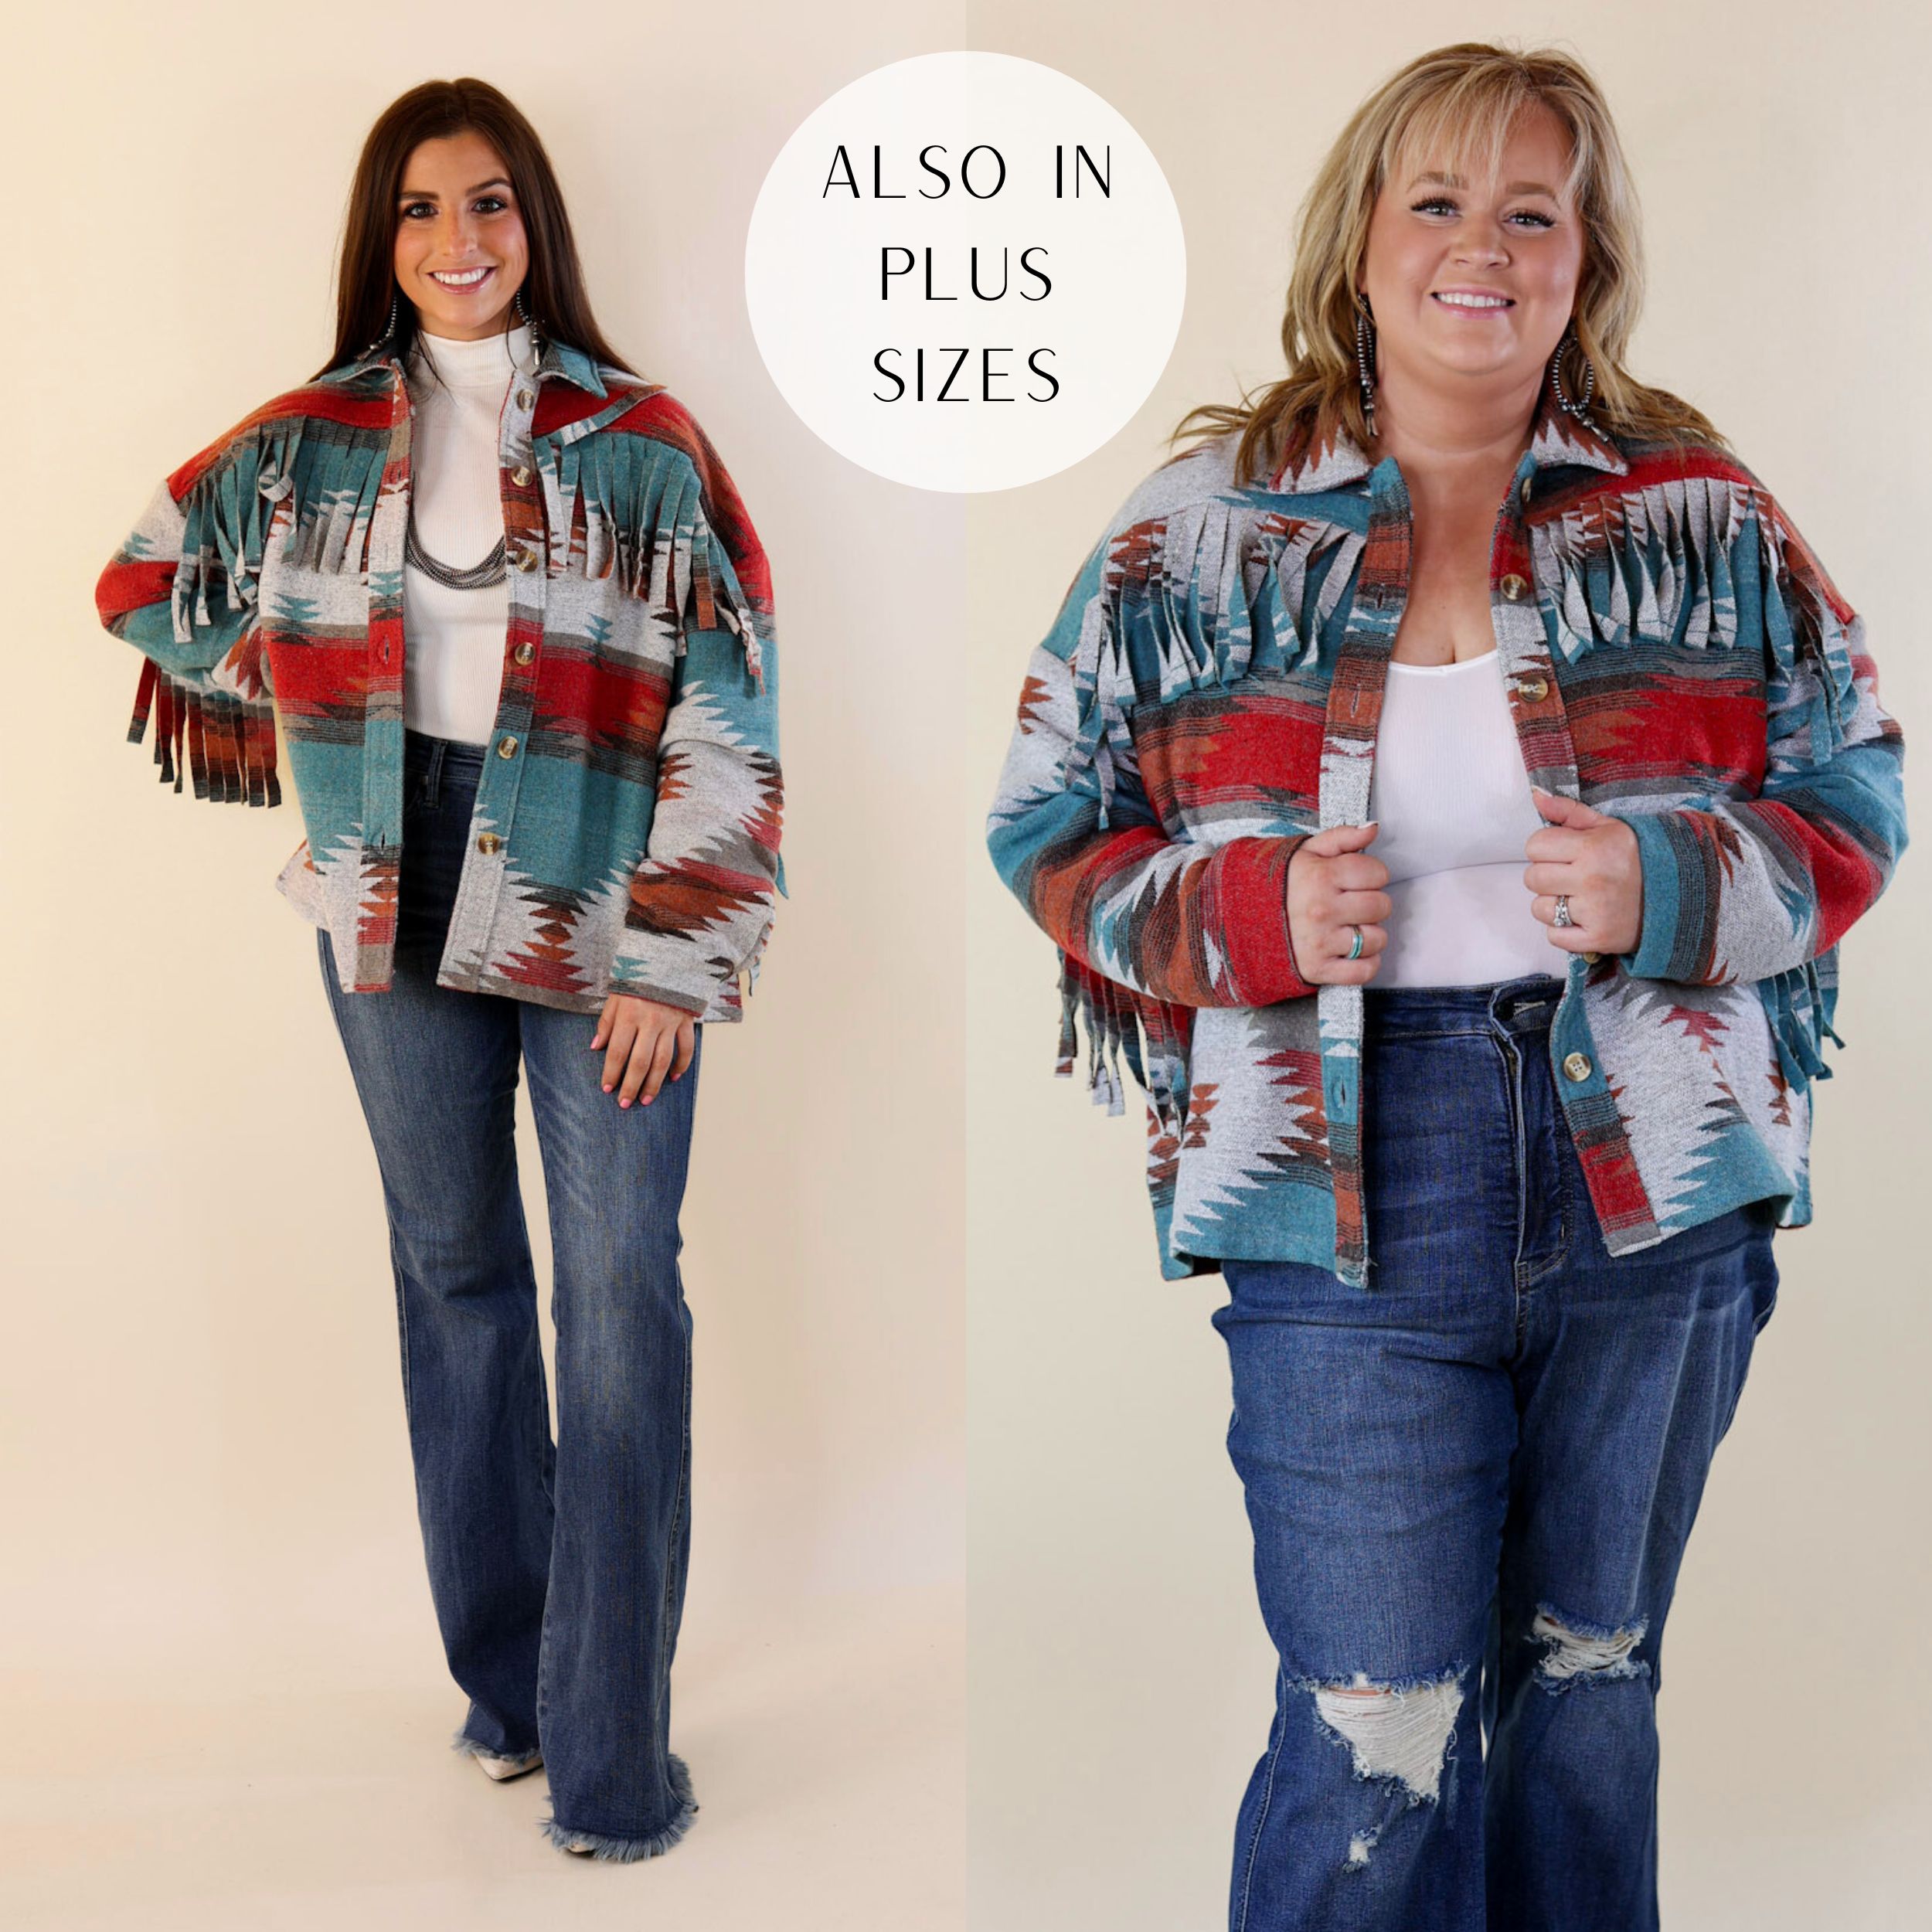 Models are wearing an aztec print fringe jacket. Size small model has it paired with dark wash jeans, white booties, and silver jewelry. Plus size model has it paired with  distressed jeans and silver jewelry.